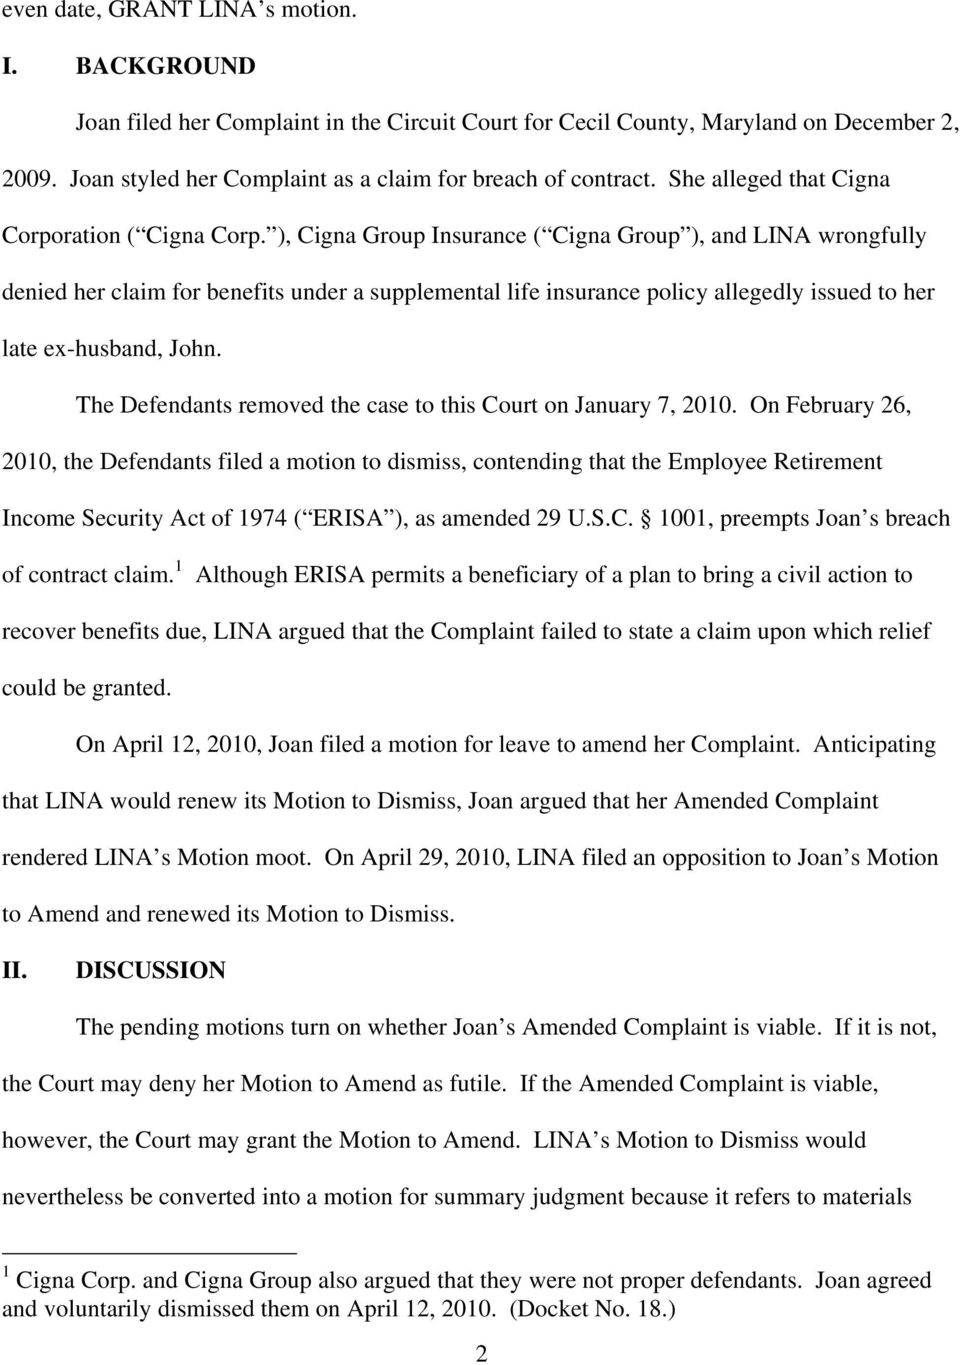 ), Cigna Group Insurance ( Cigna Group ), and LINA wrongfully denied her claim for benefits under a supplemental life insurance policy allegedly issued to her late ex-husband, John.